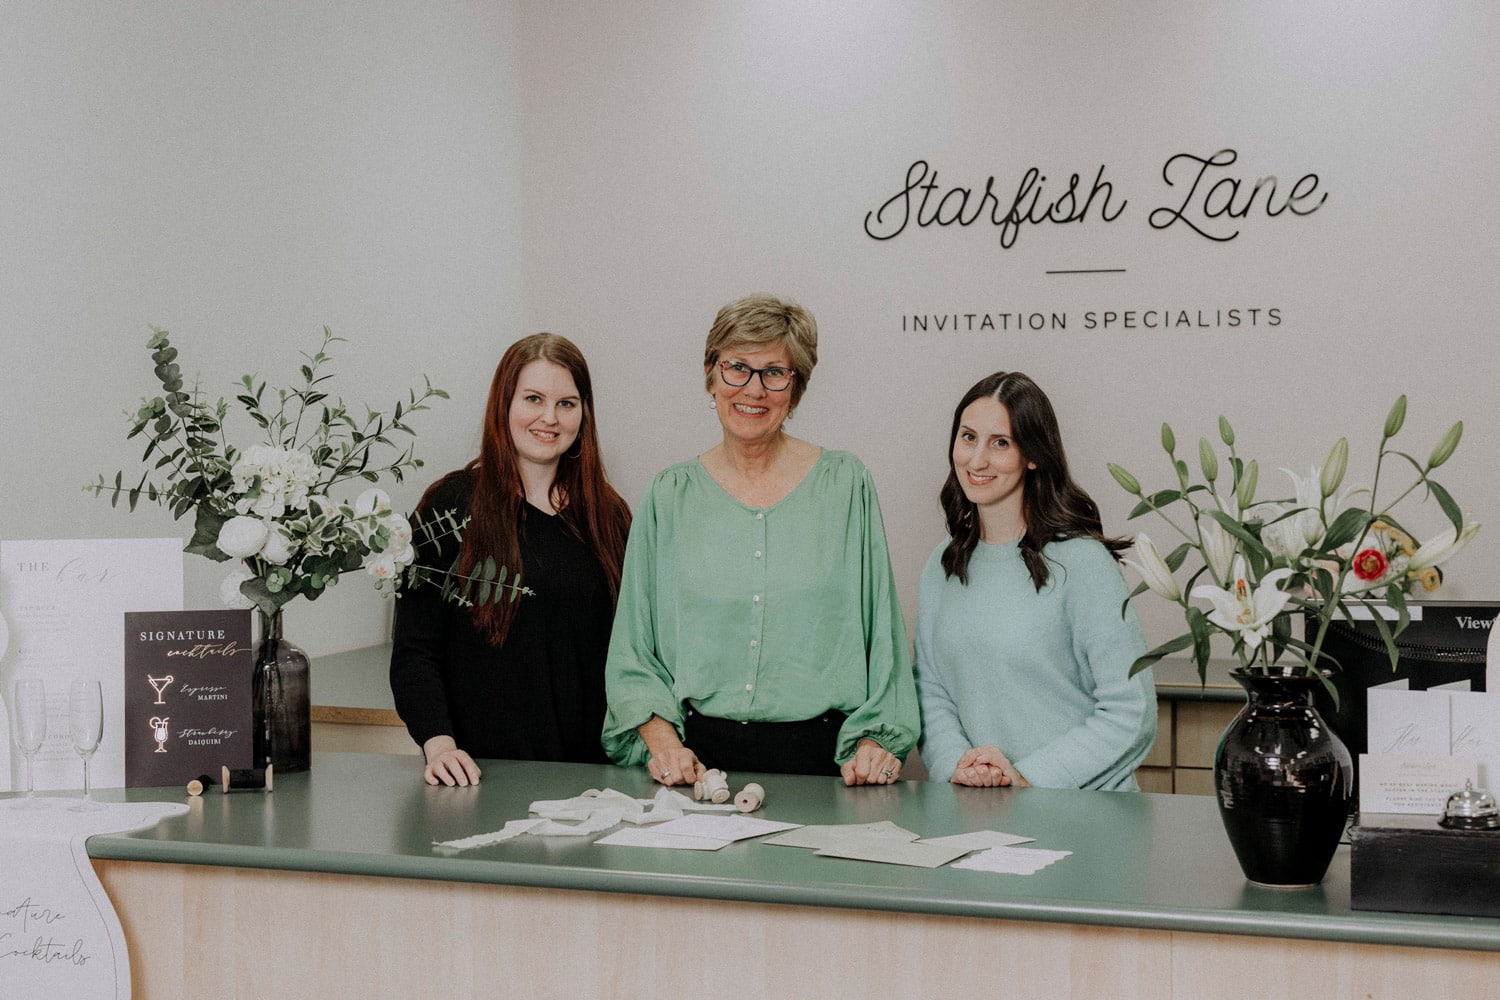 About Starfish Lane - Invitation Specialists